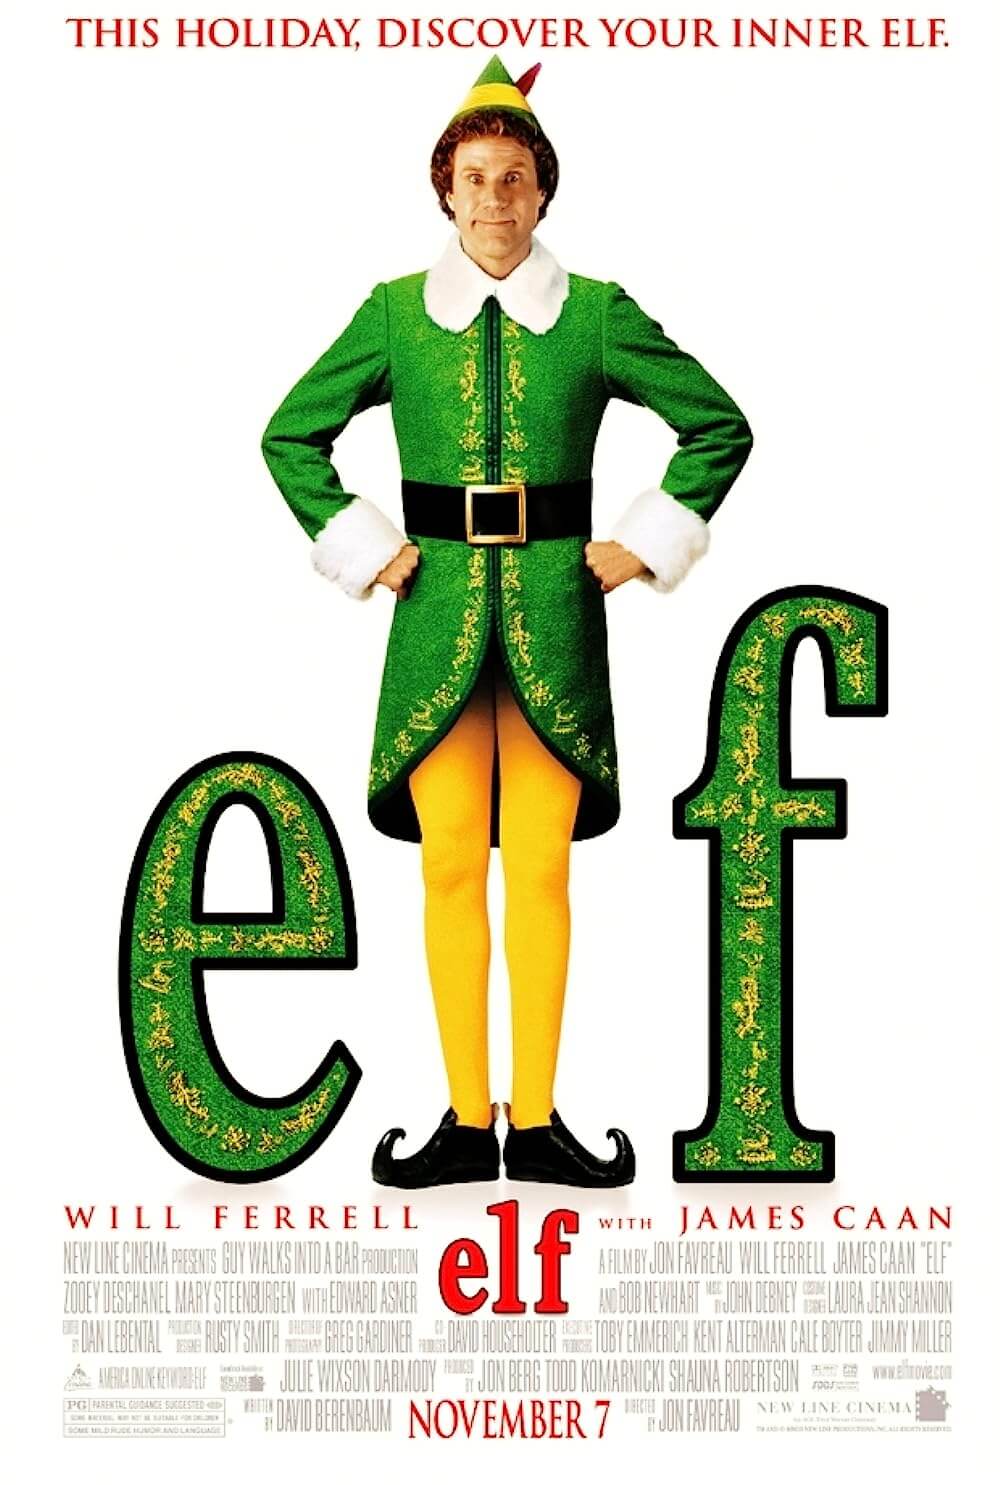 Watch Elf movie, one of the best movies for 7 year olds on Netflix.